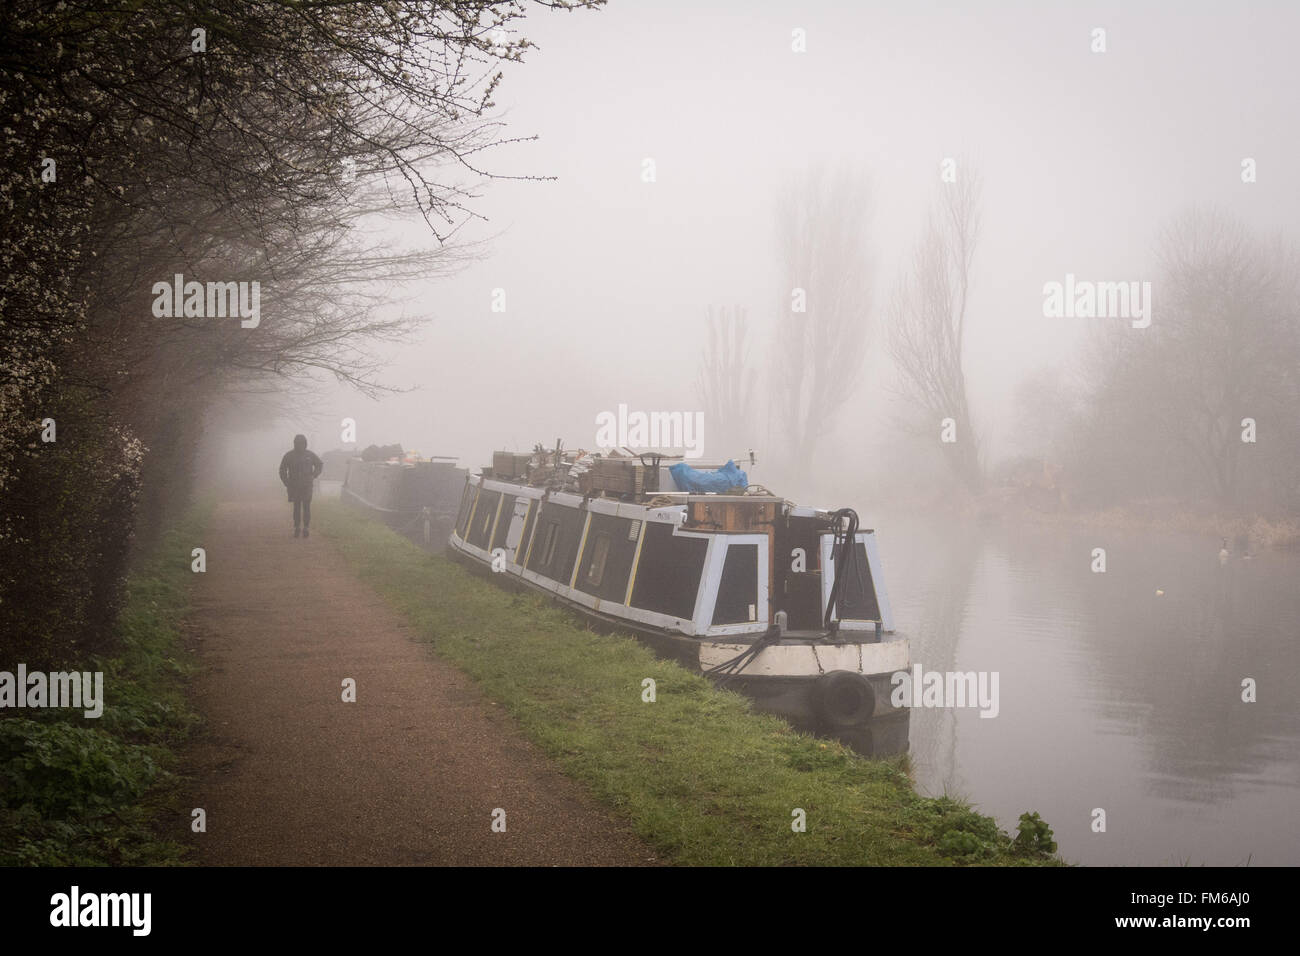 A man walks along the towpath beside some houseboats on a morning of dense fog on the River Lee navigation, Tottenham, London. Credit: Patricia Phillips/Alamy Live News Stock Photo